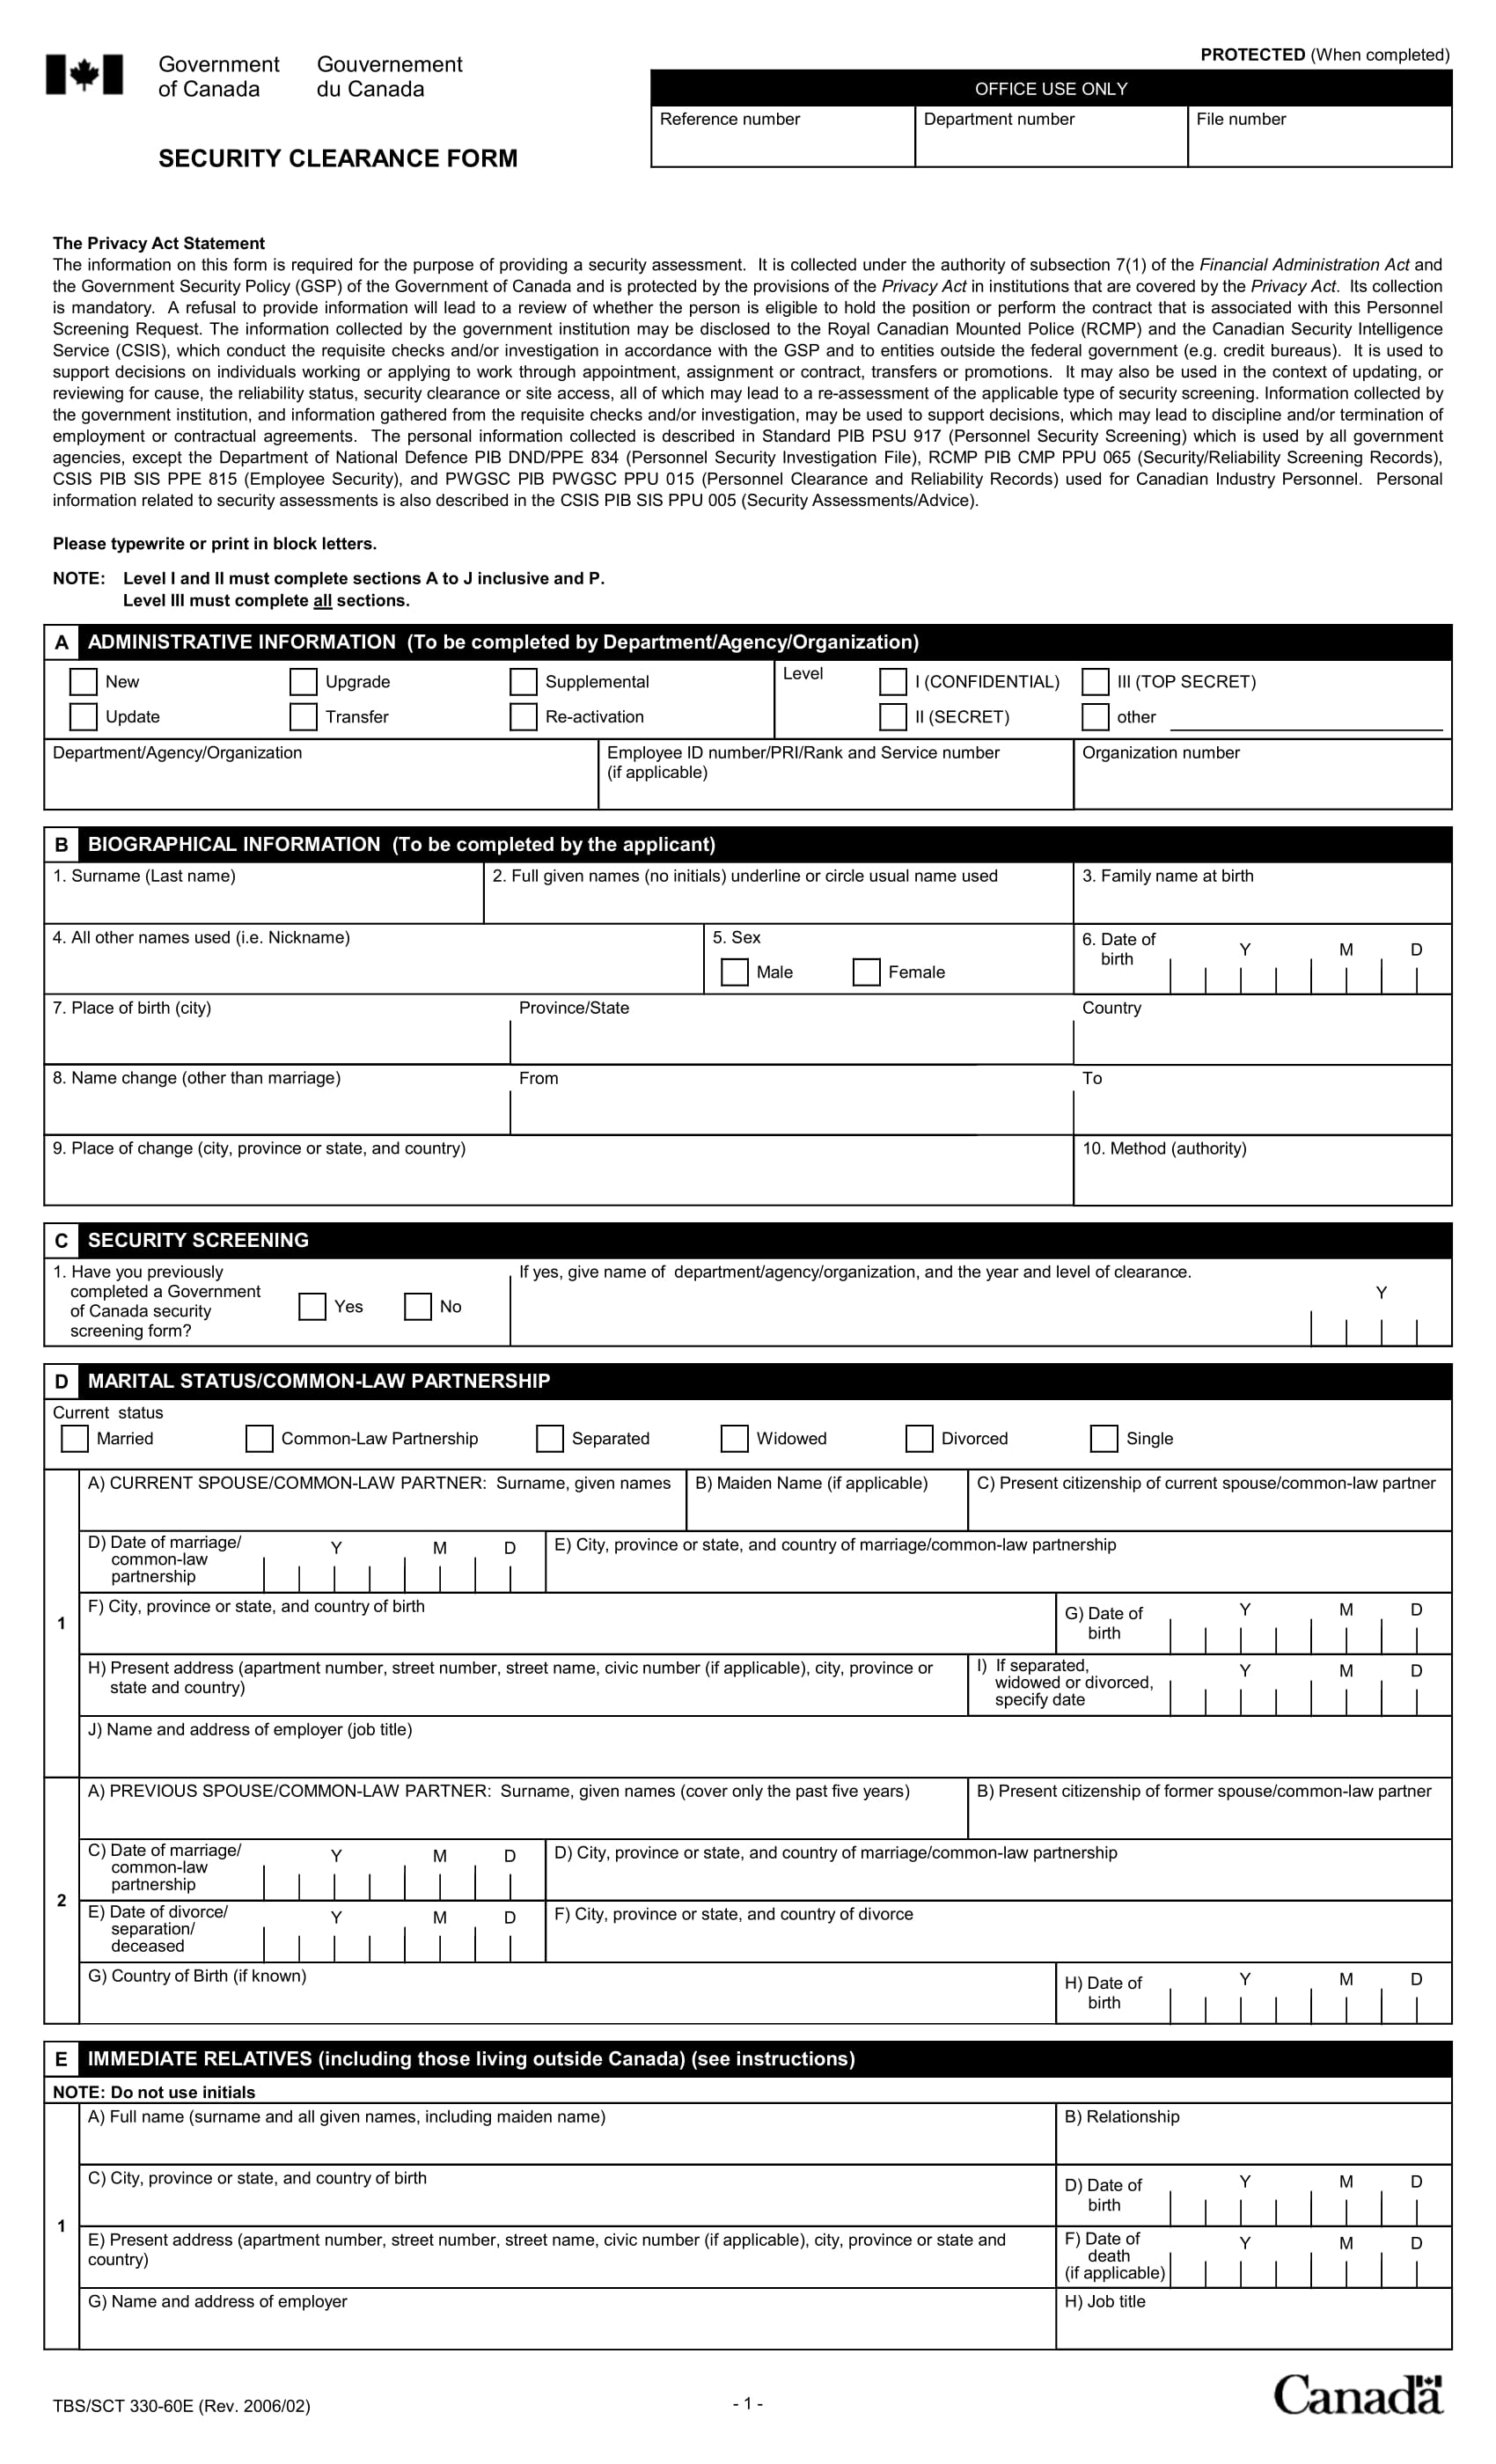 security clearance form 1